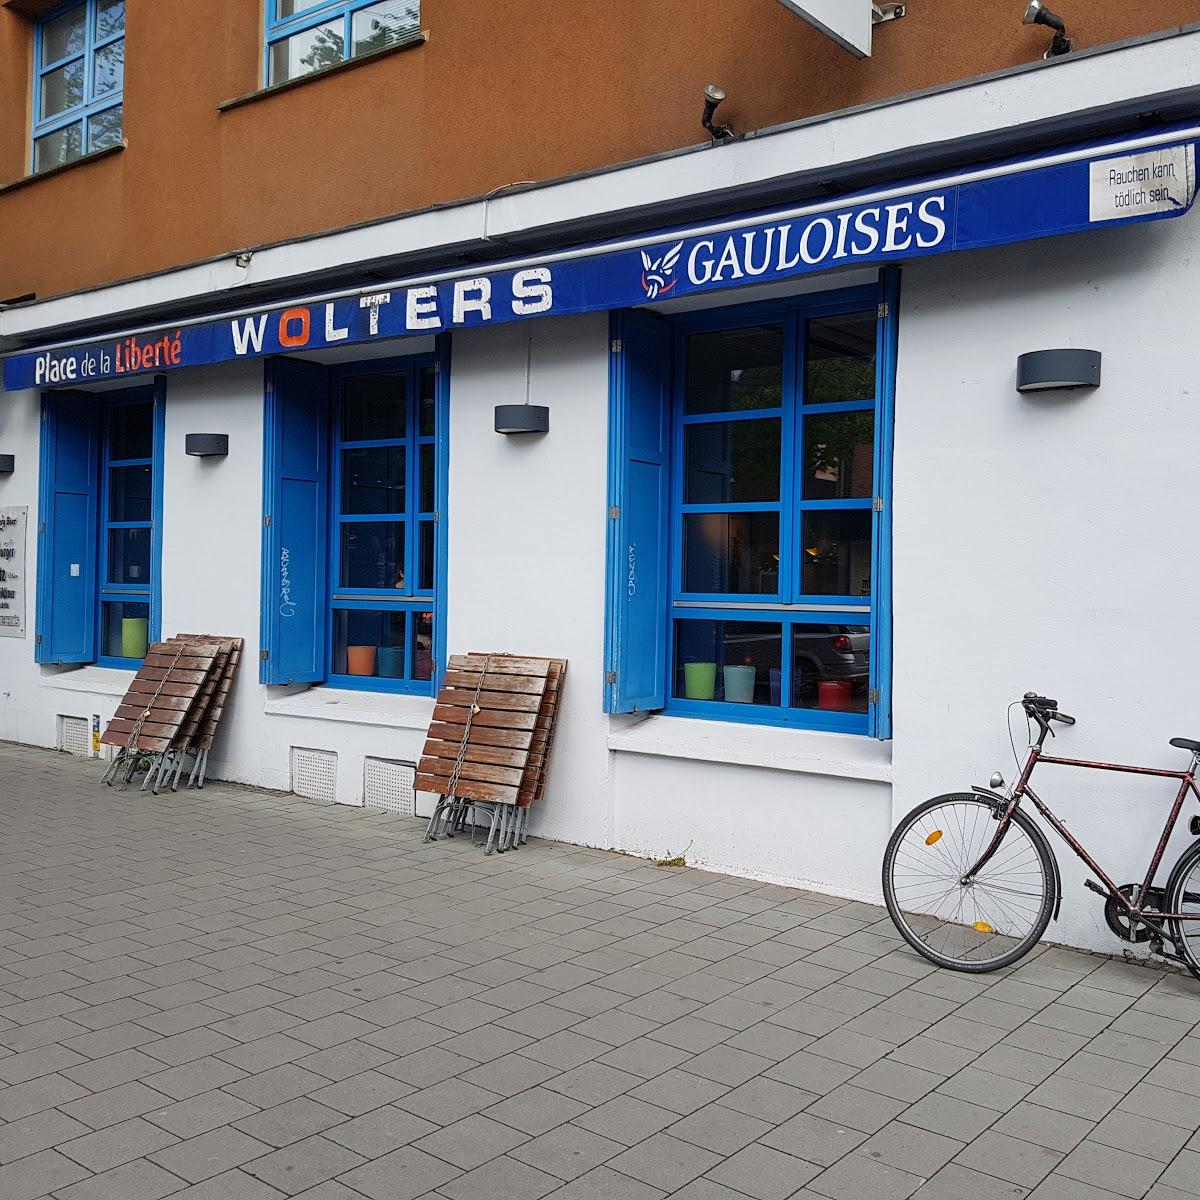 Restaurant "Wolters I" in Münster